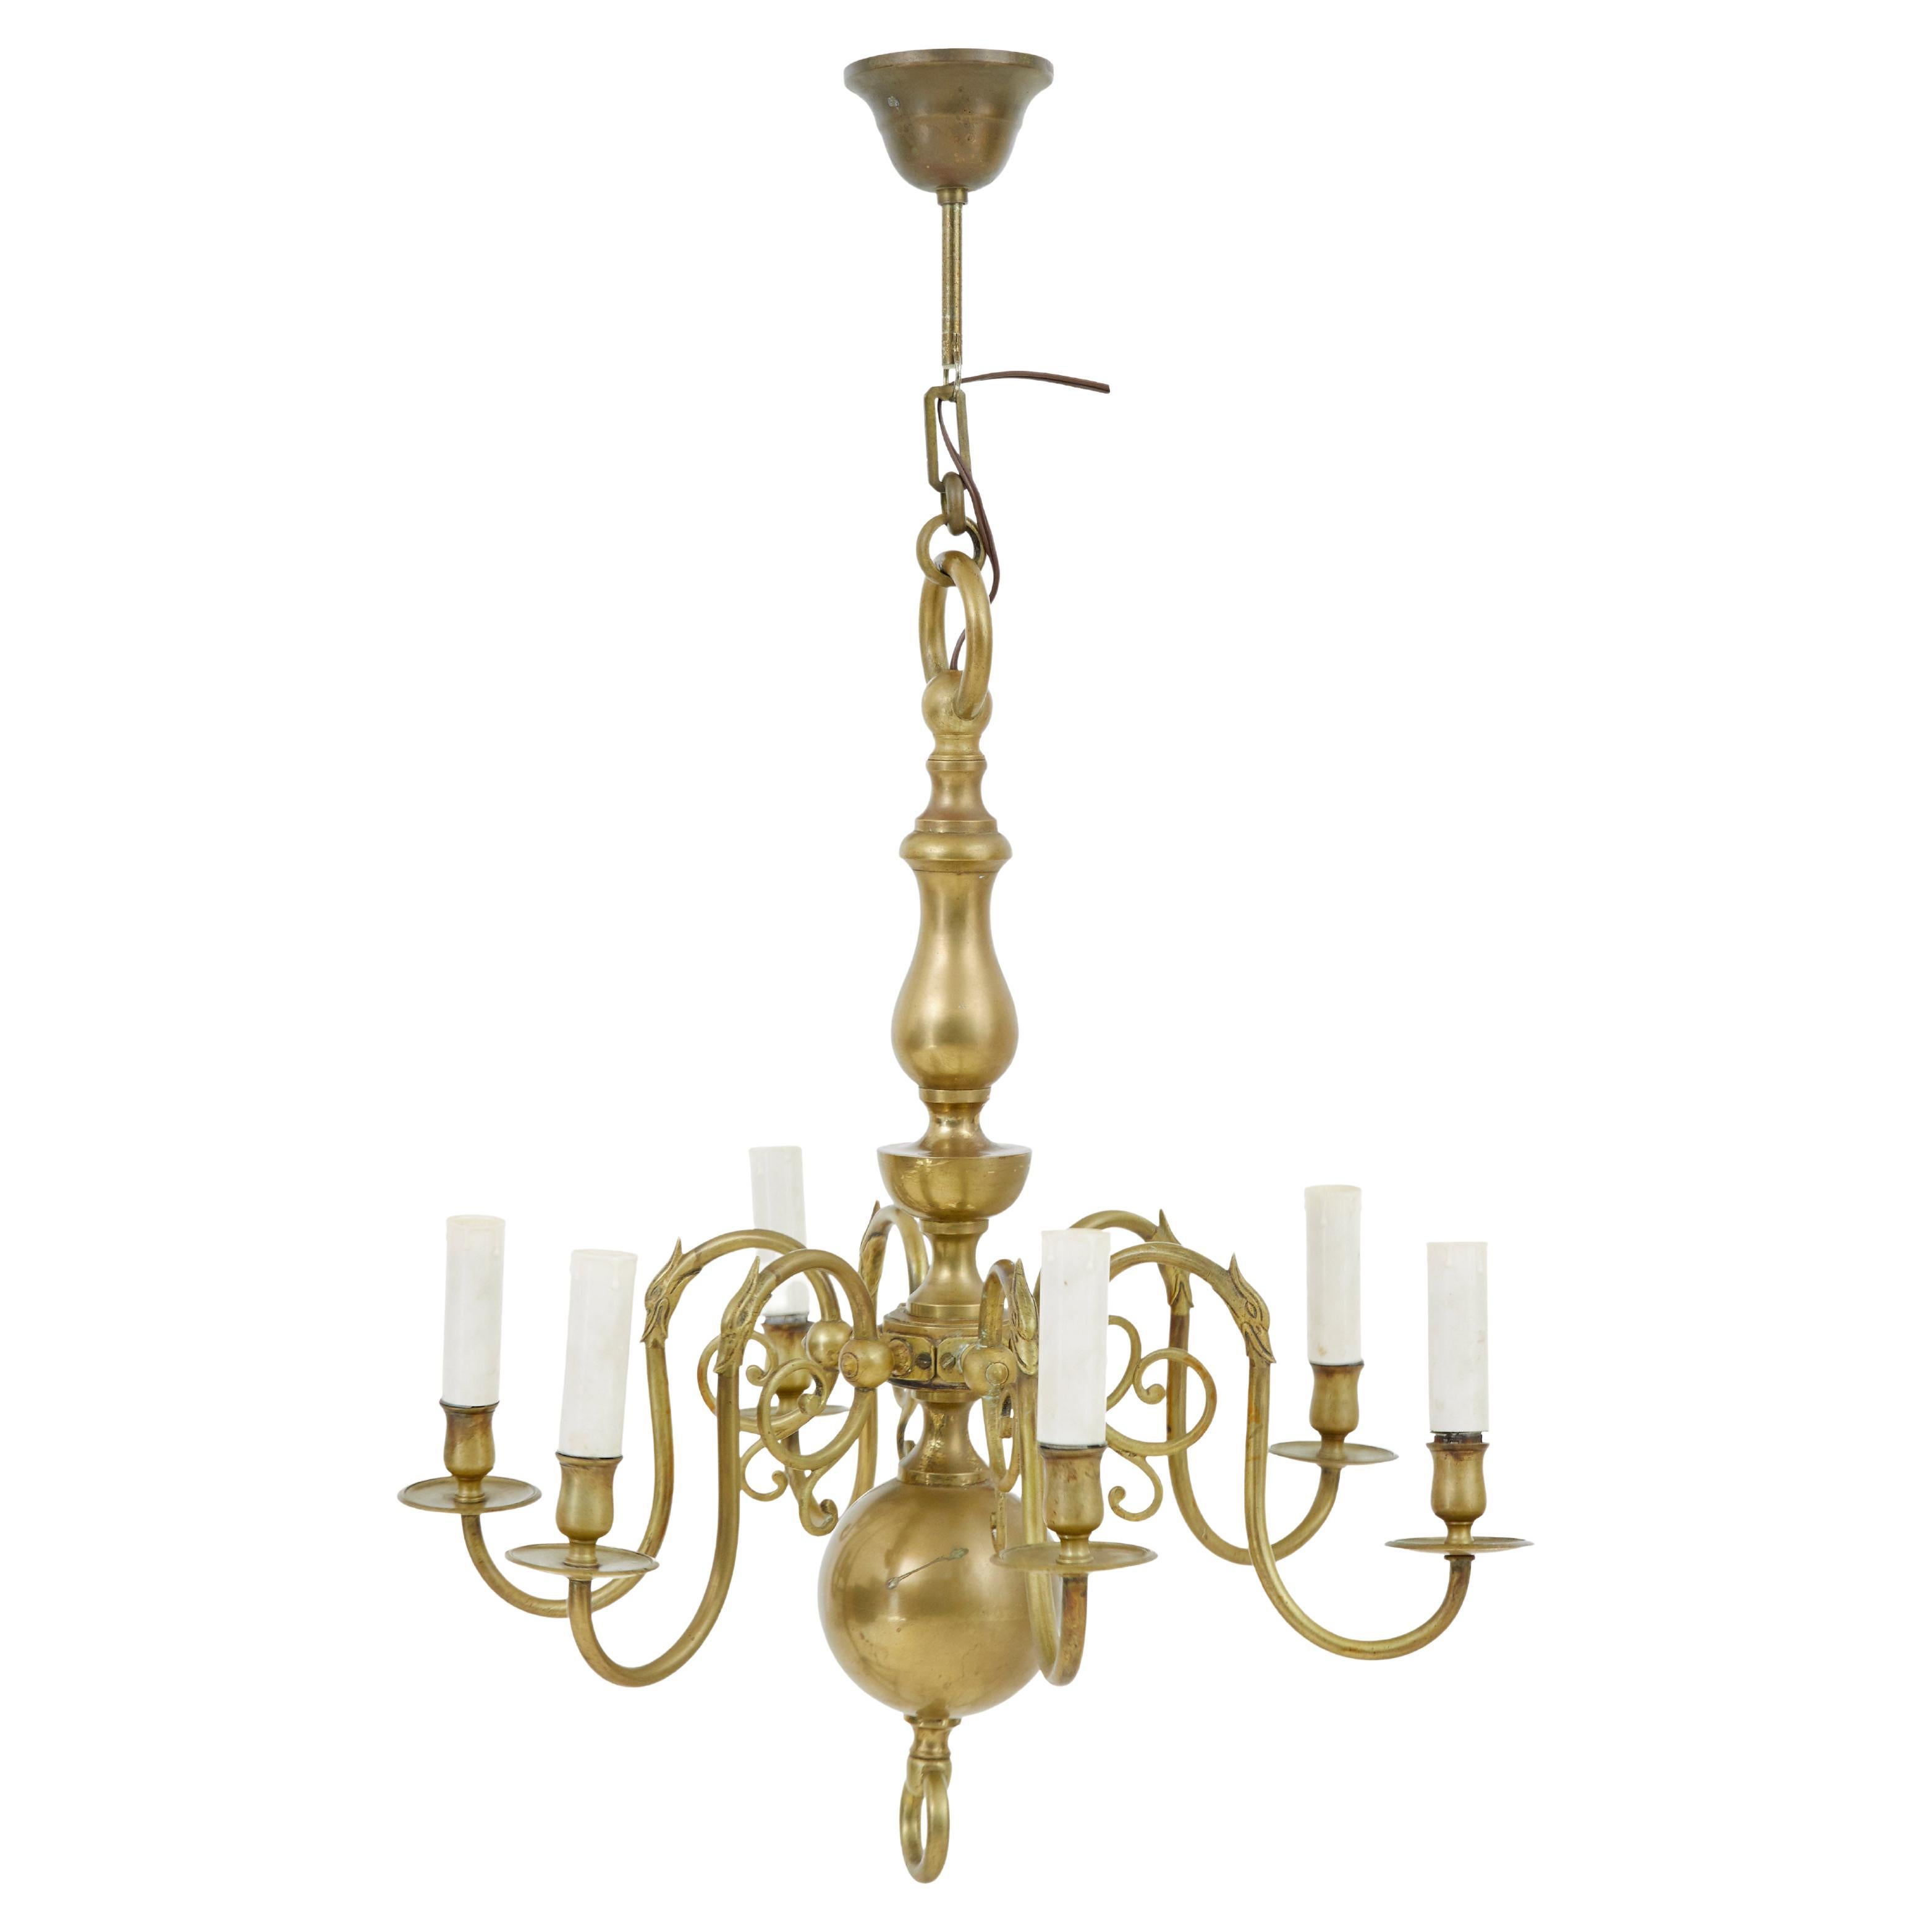 Early 20th century 6 arm brass chandelier